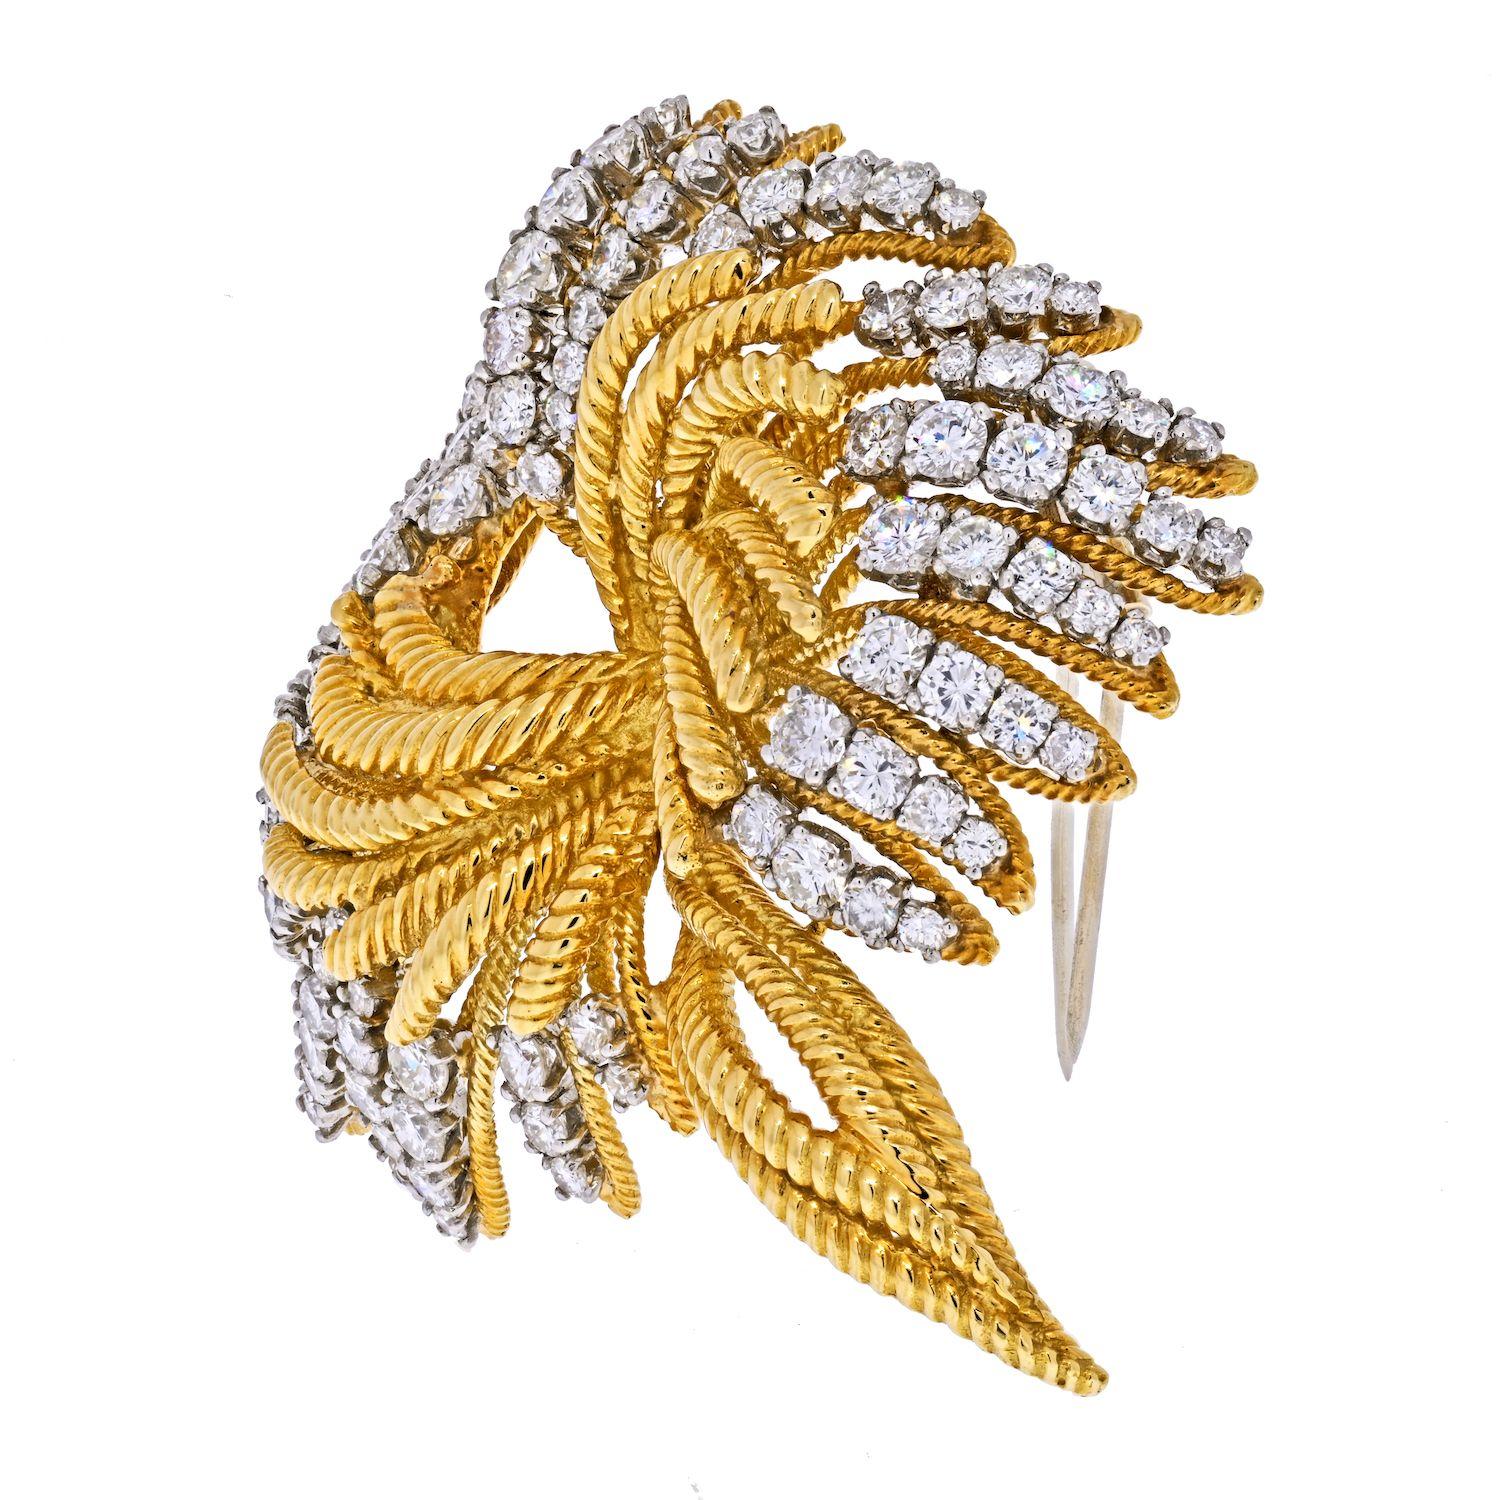 Platinum & 18K Yellow Gold 1960's Spray Of Diamonds 8.50cts Fluted Brooch.
L: 6cm
W: 5.6cm
Double pin closuser.